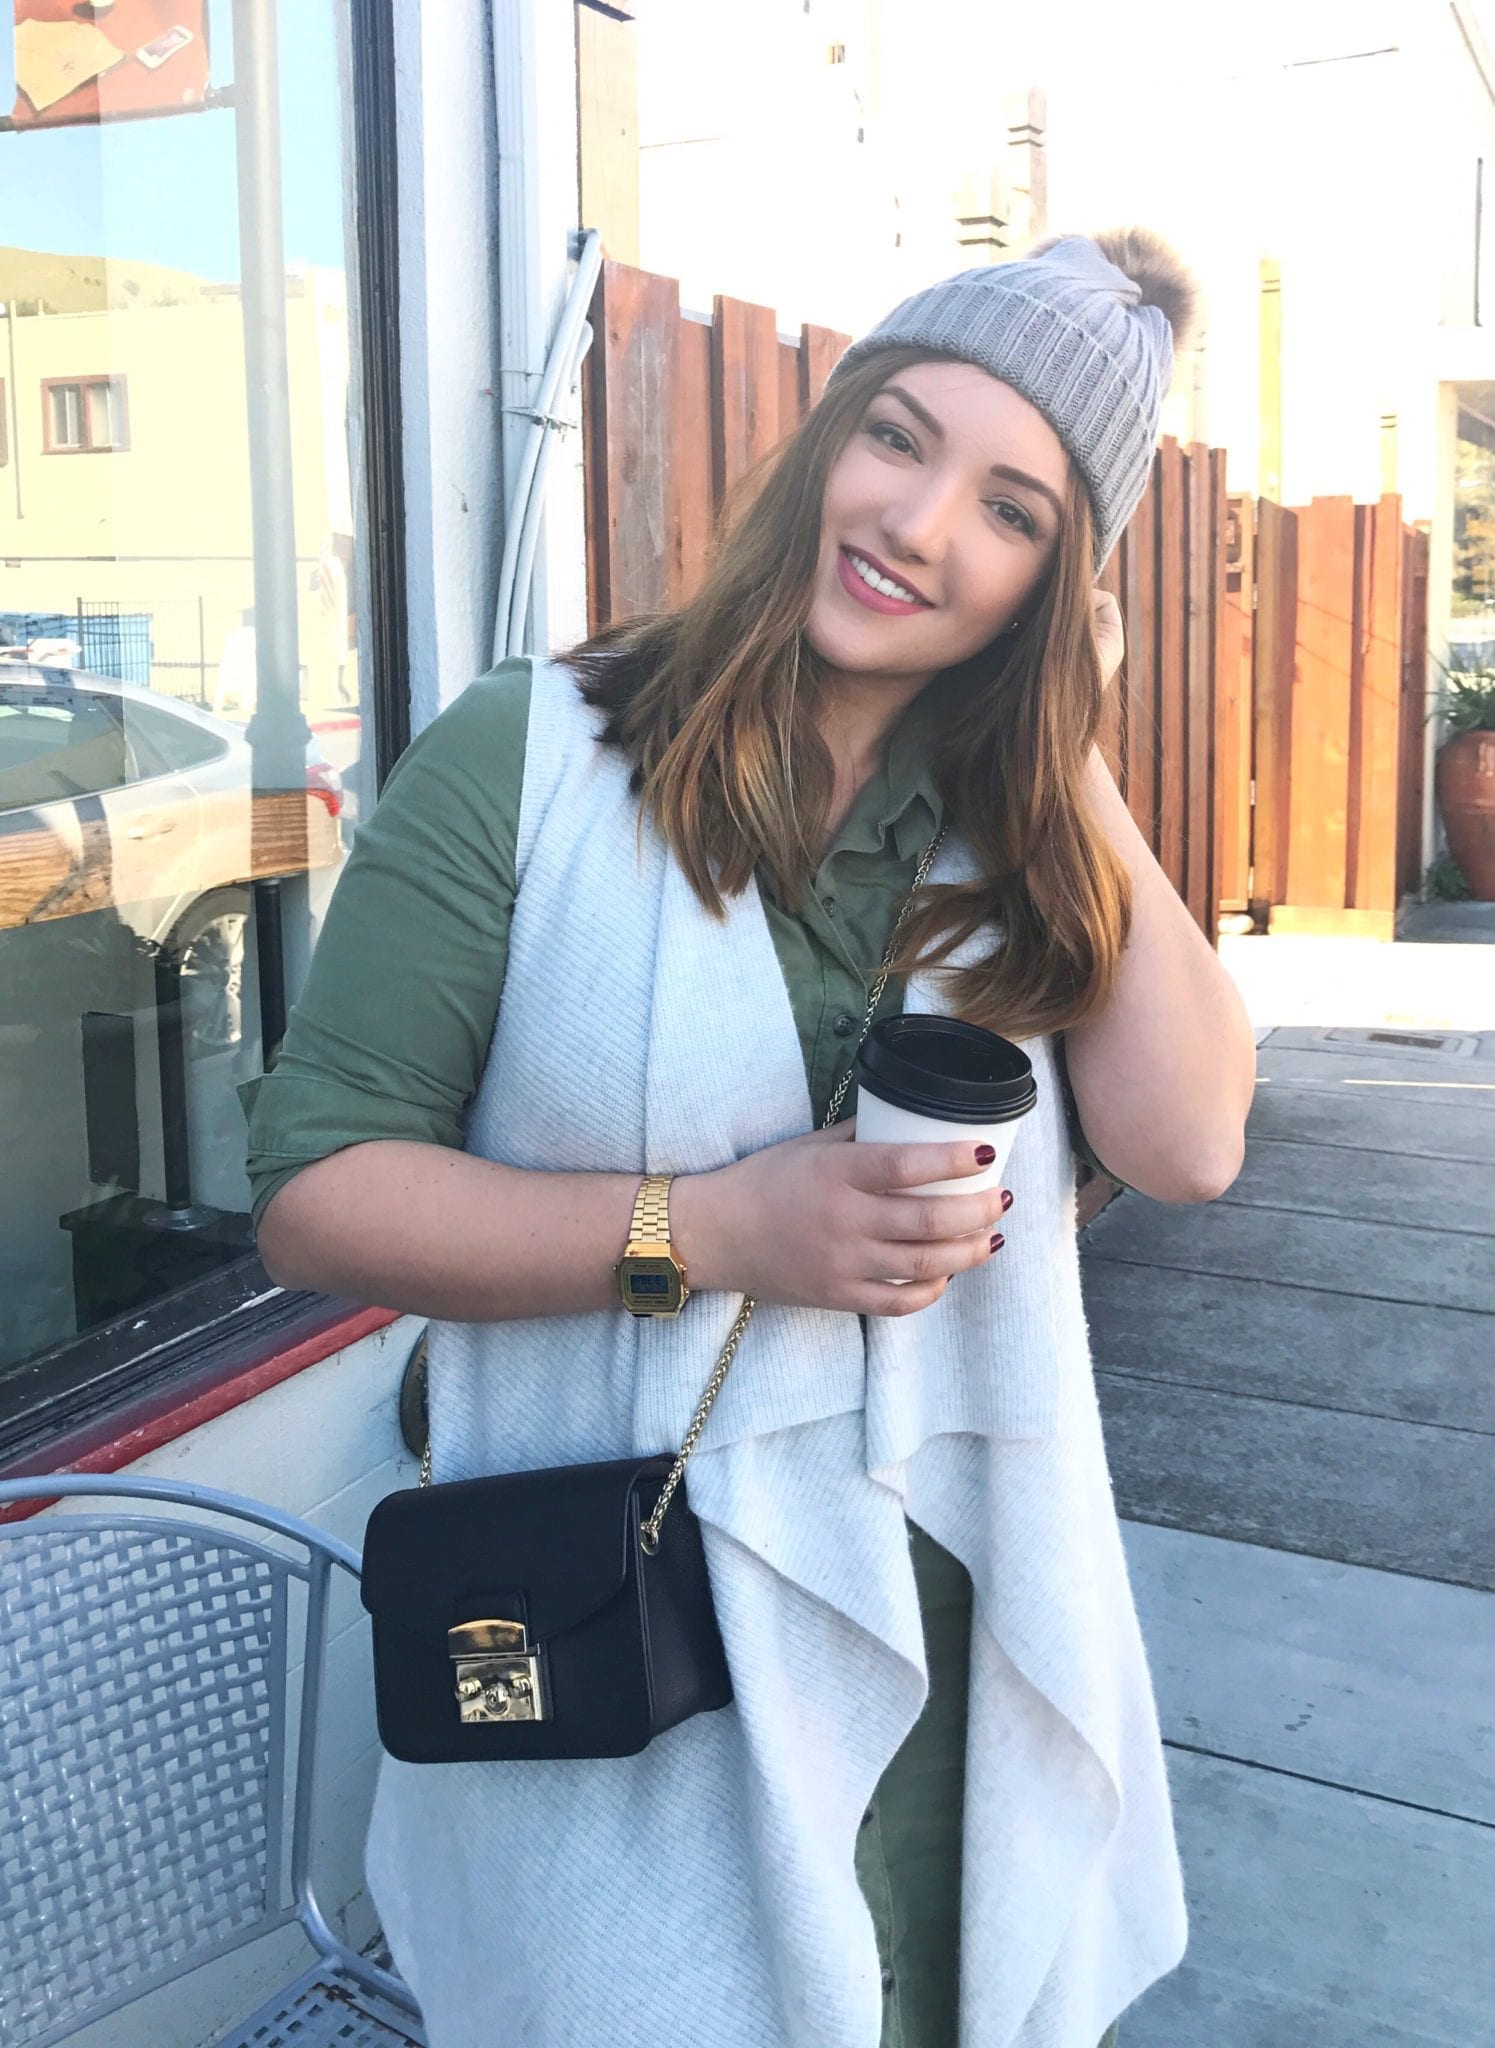 Vintage Casio Watch featured by popular San Francisco style blogger, Just Add Glam